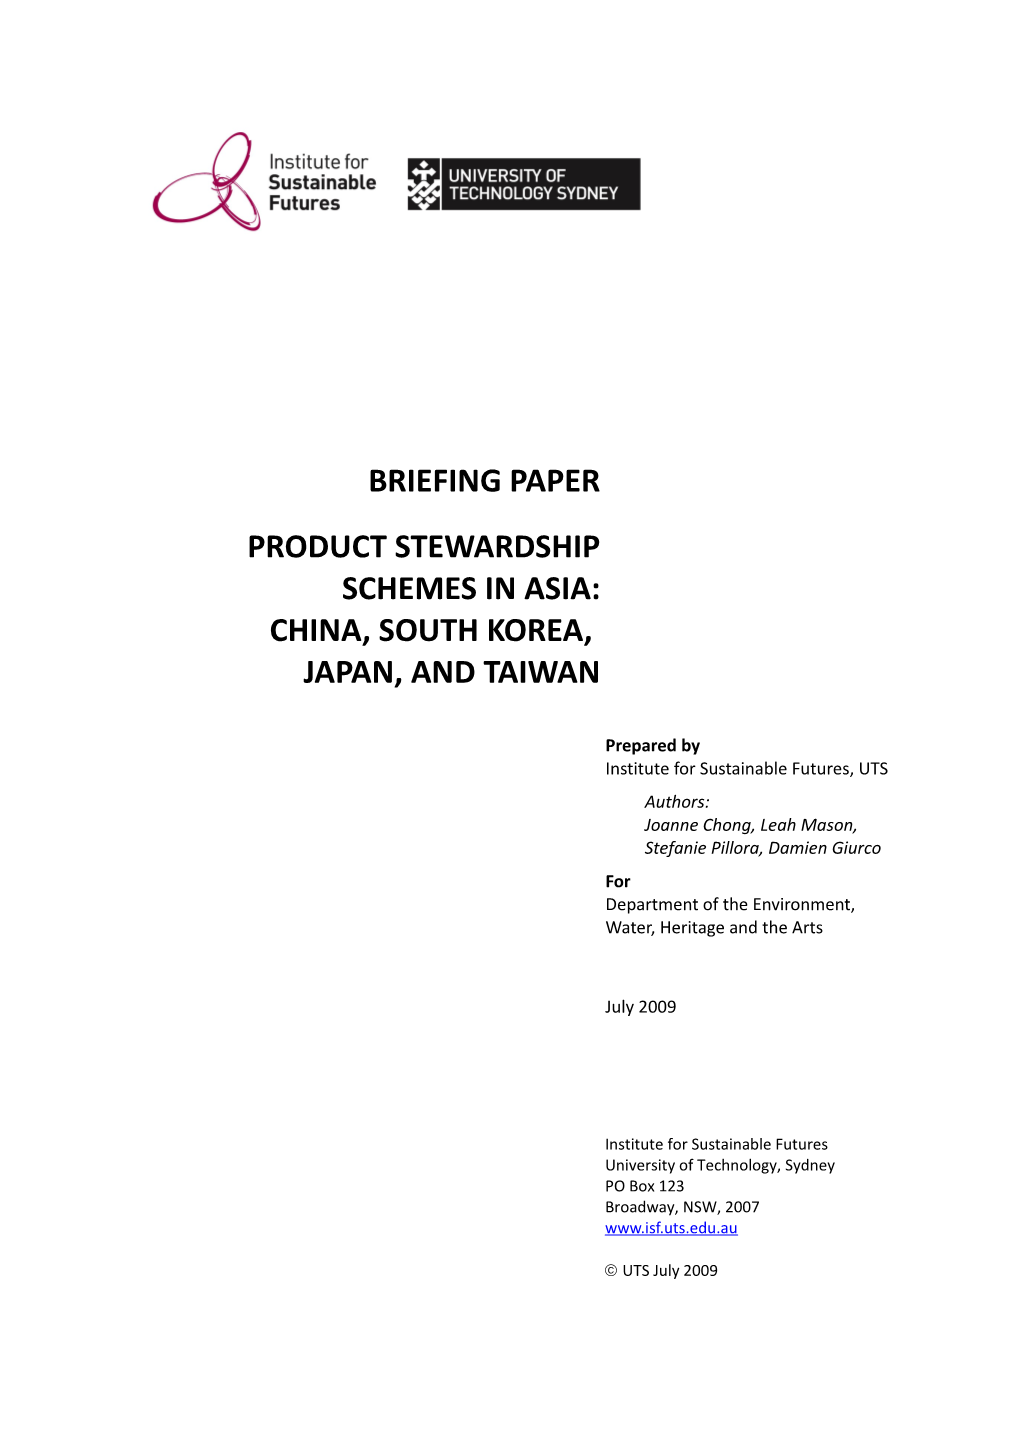 Product Stewardship Schemes in Asia: China, South Korea, Japan and Taiwan